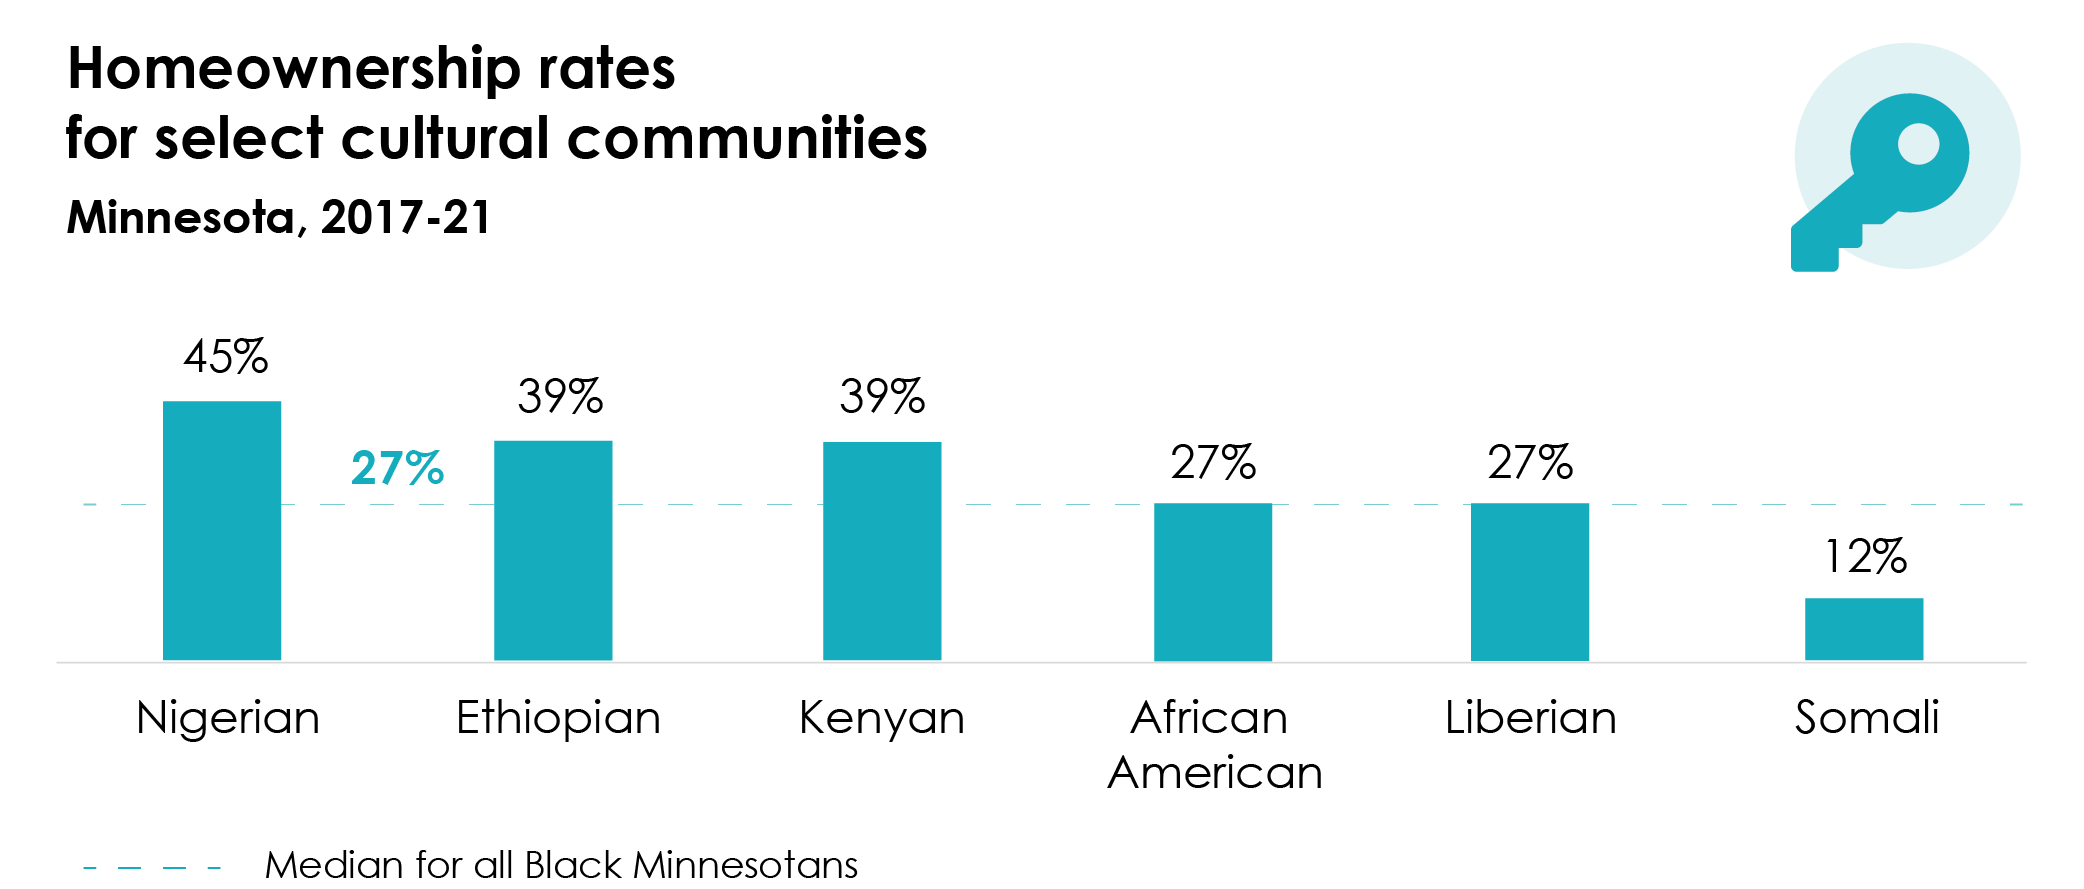 Homeownership rates for select cultural communities, Minnesota, 2017-21